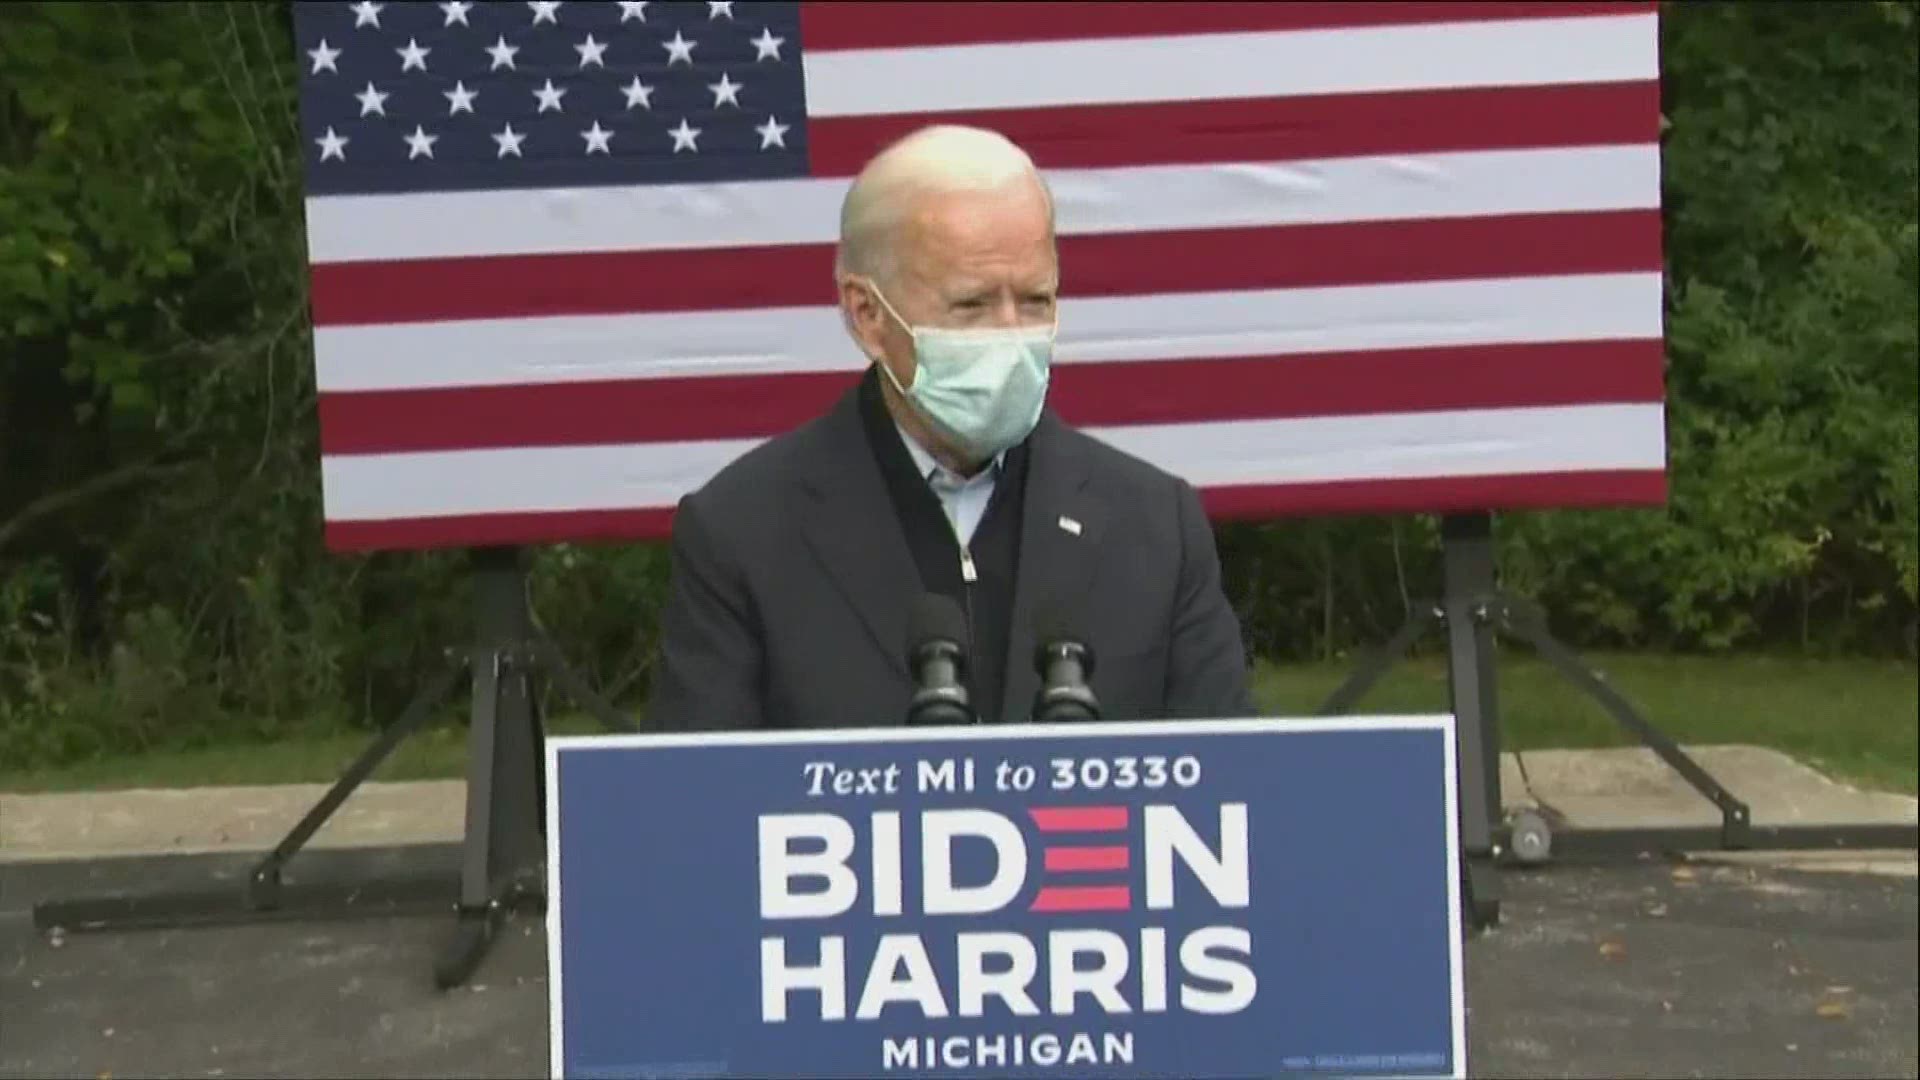 Joe Biden spoke in Grand Rapids today about the importance of social distancing, wearing a mask and listening to the science.